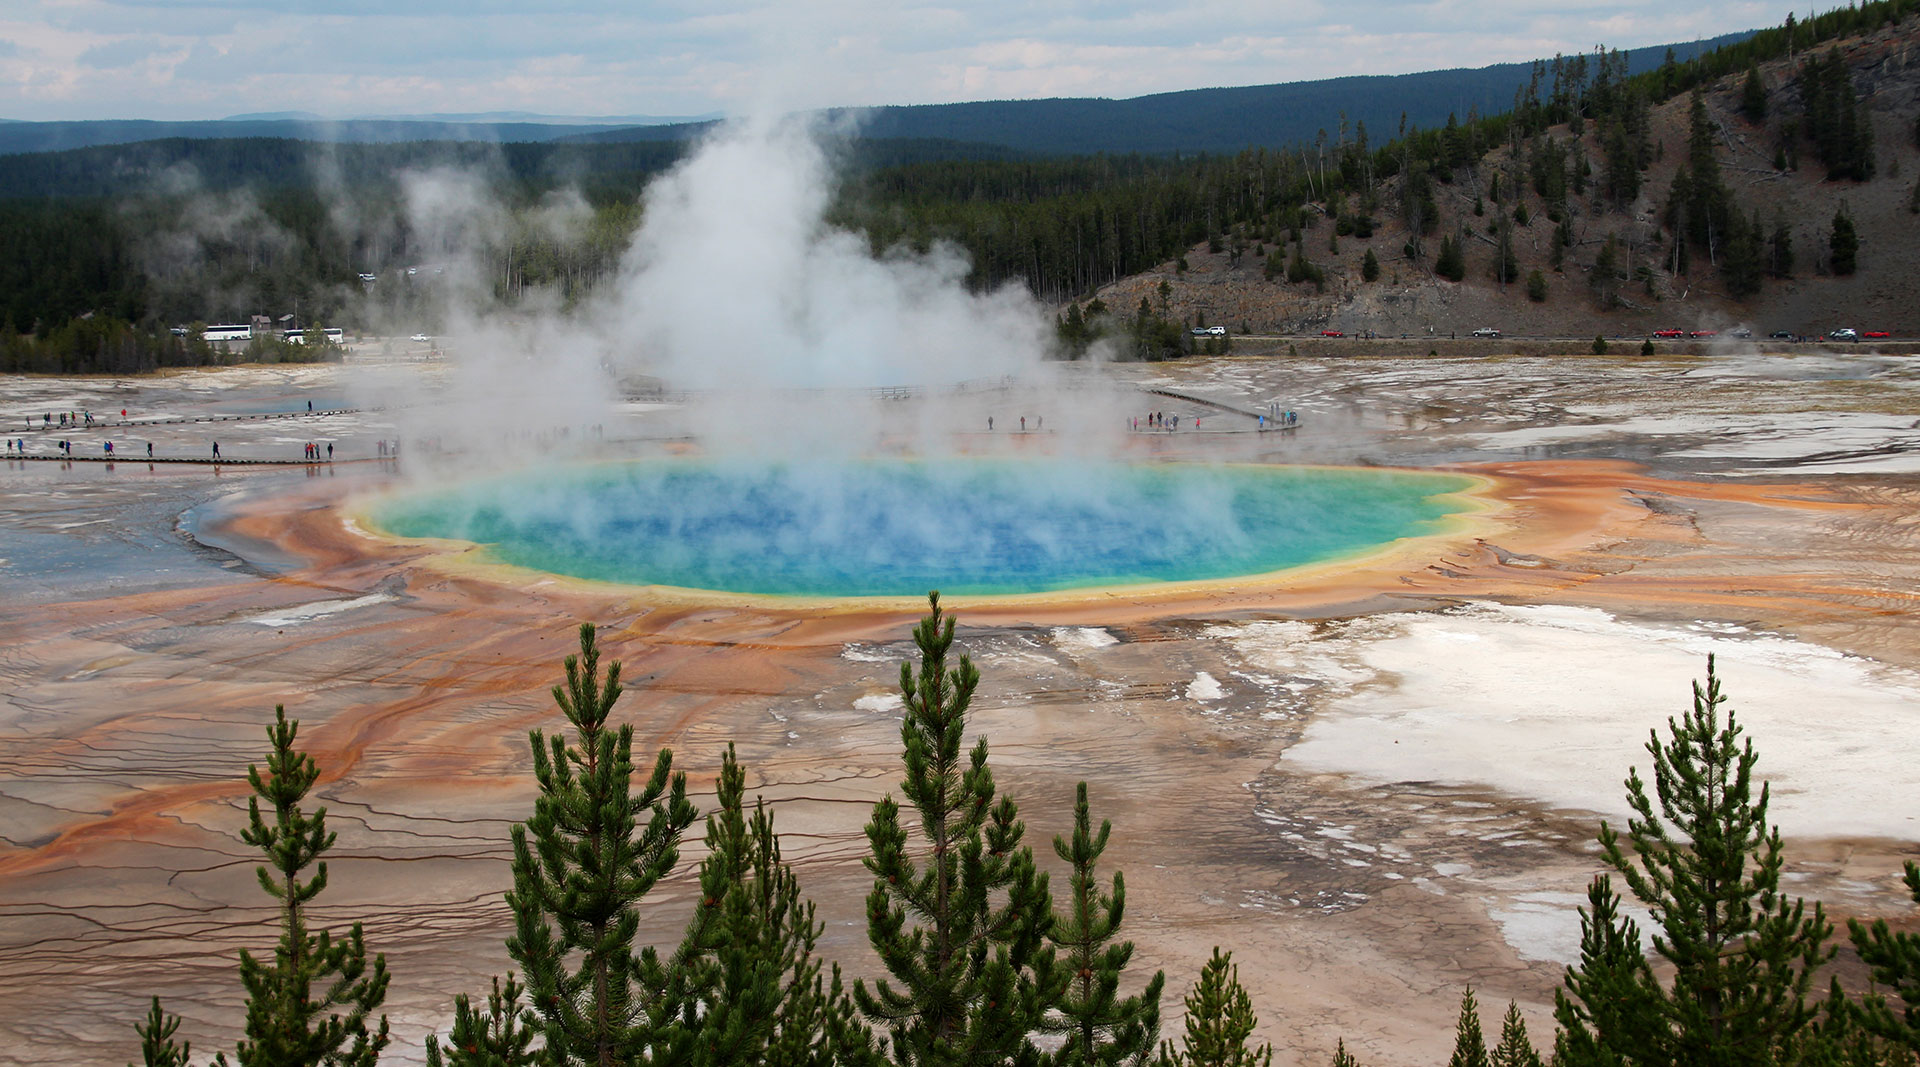 Below are just a small sampling of the photos from my visit to Yellowstone ...